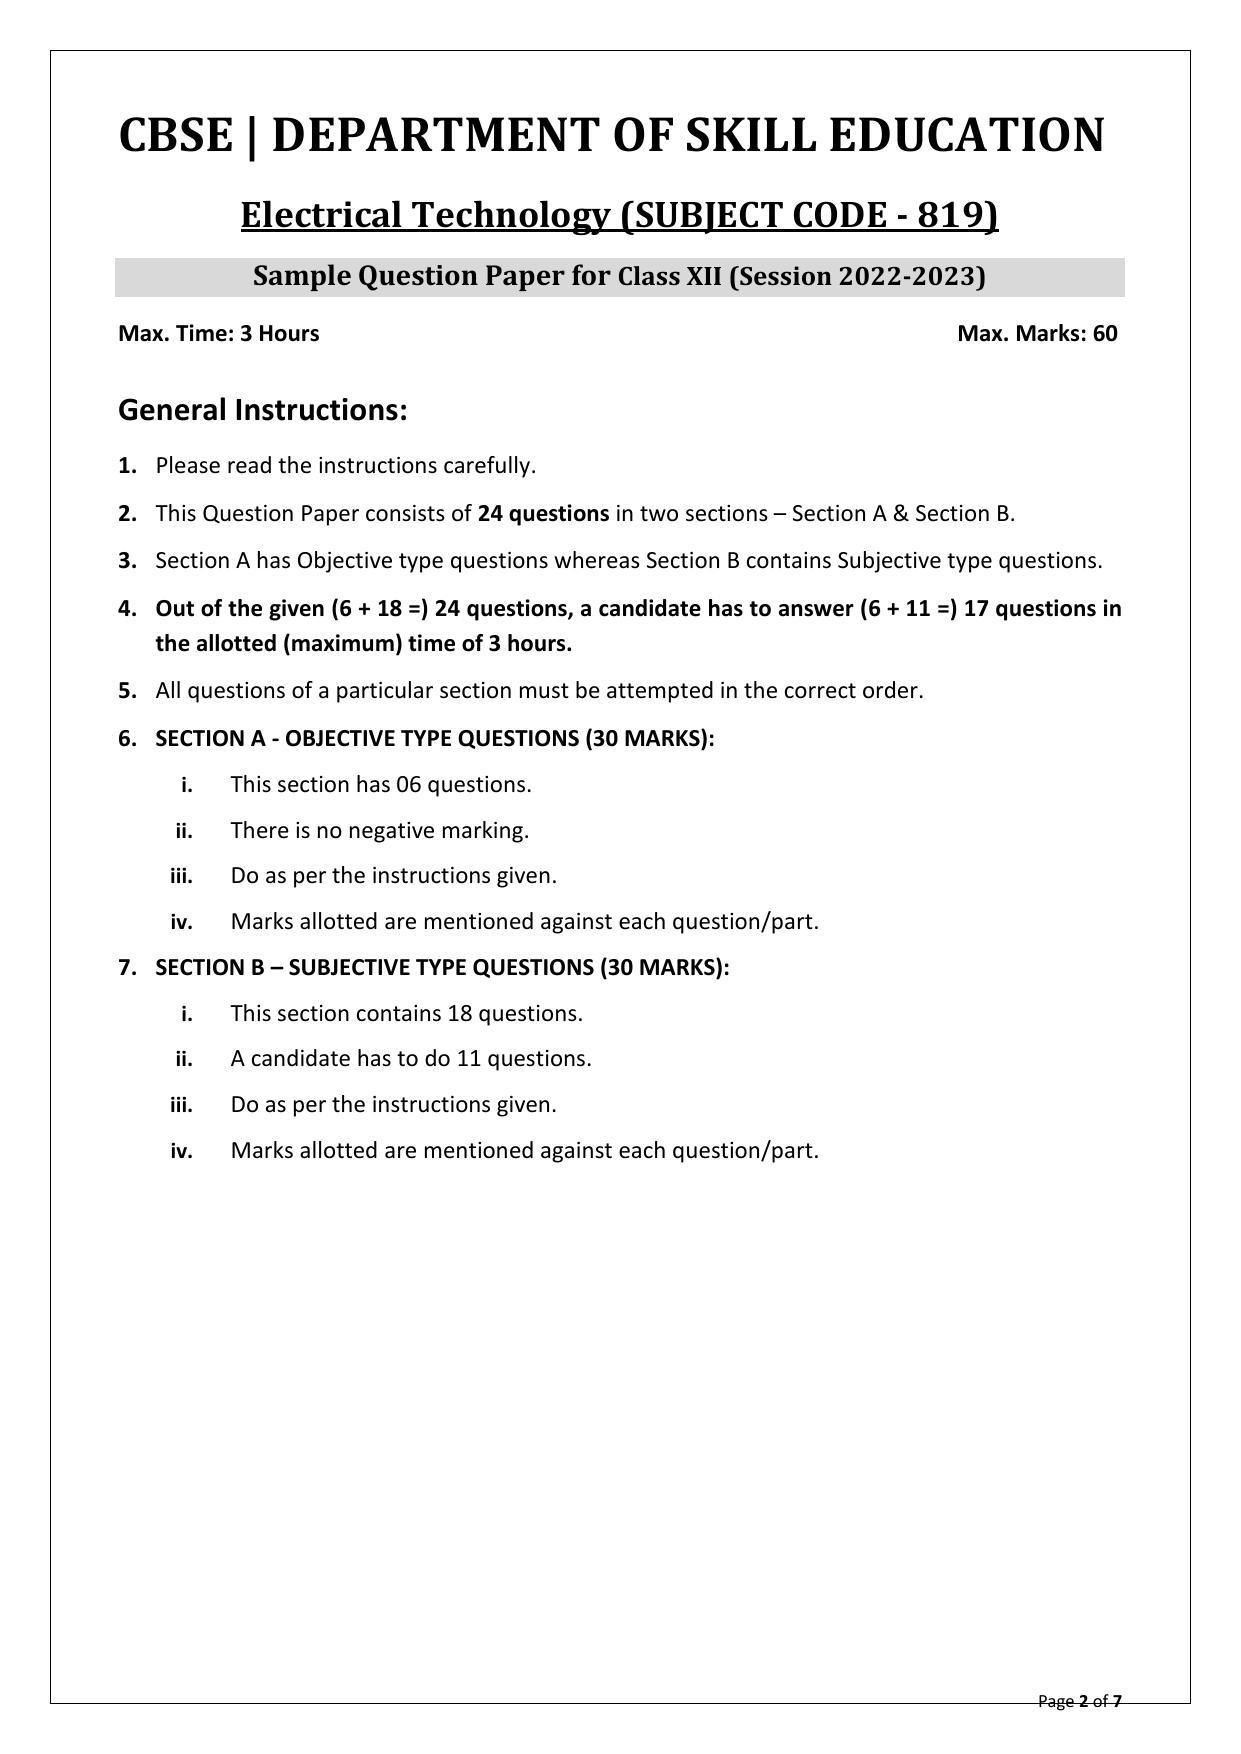 CBSE Class 12 Electrical Technology (Skill Education) Sample Papers 2023 - Page 2